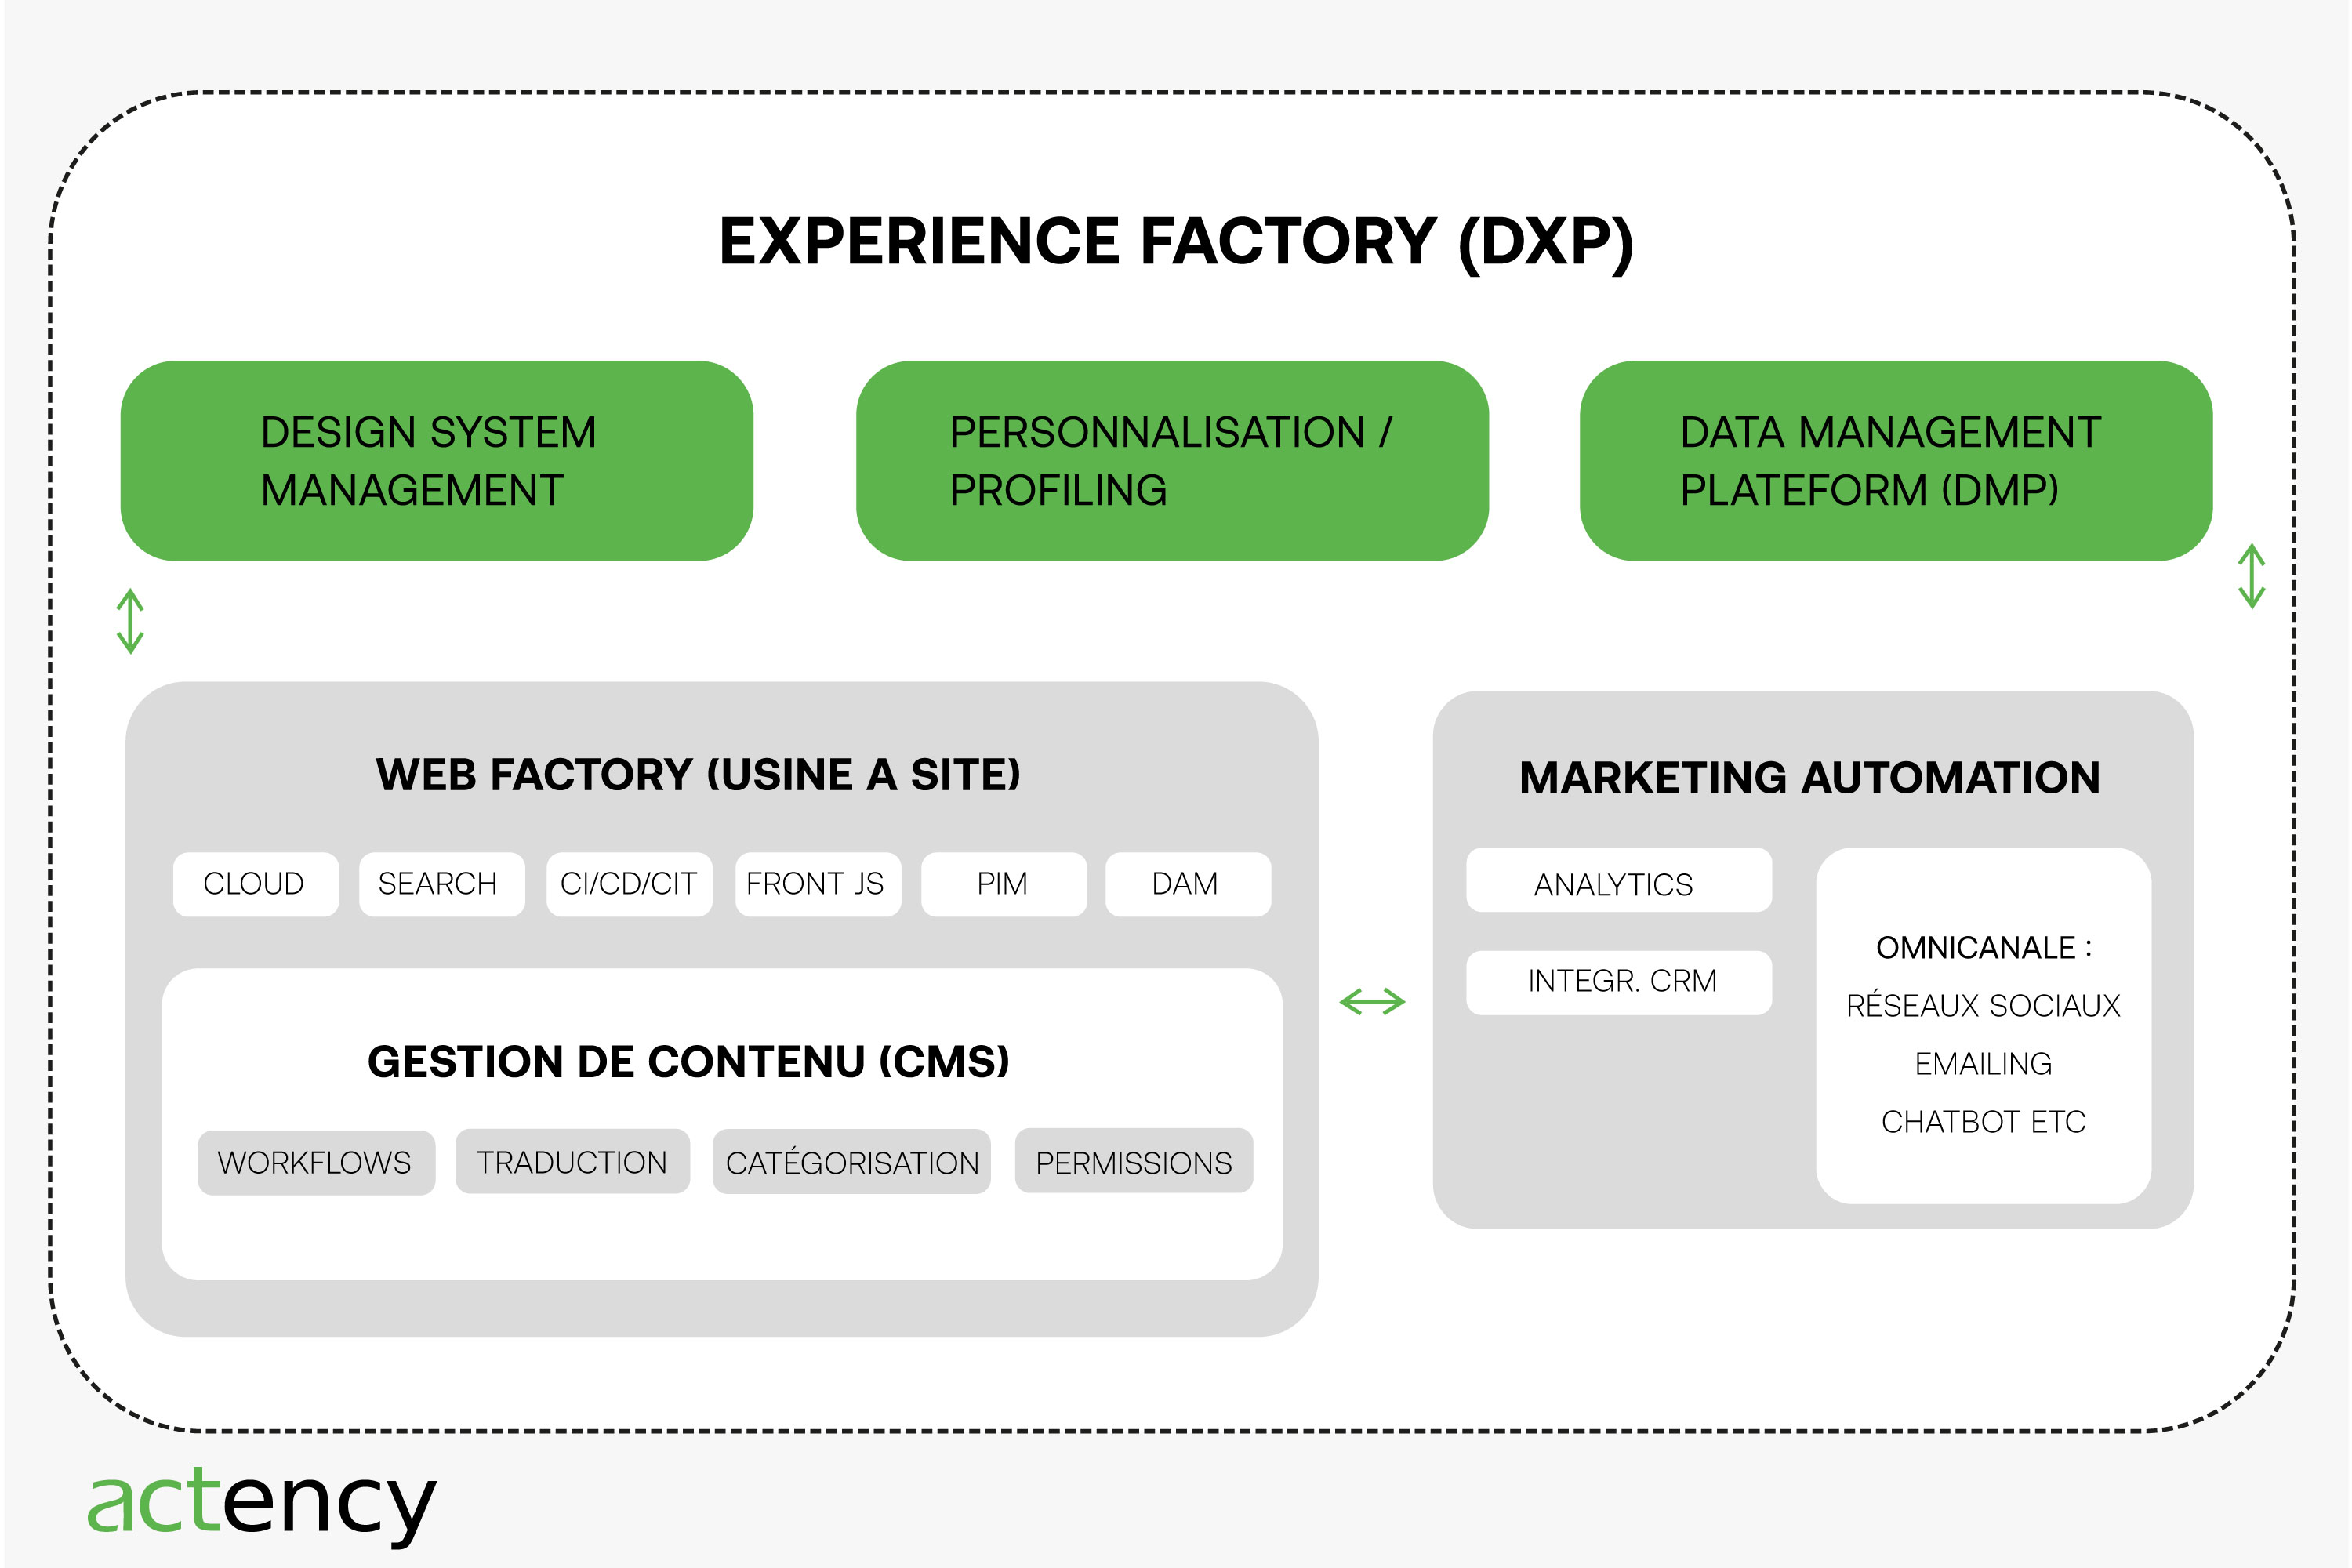 EXPERIENCE-FACTORY-DXP-DESIGN-SYSTEM